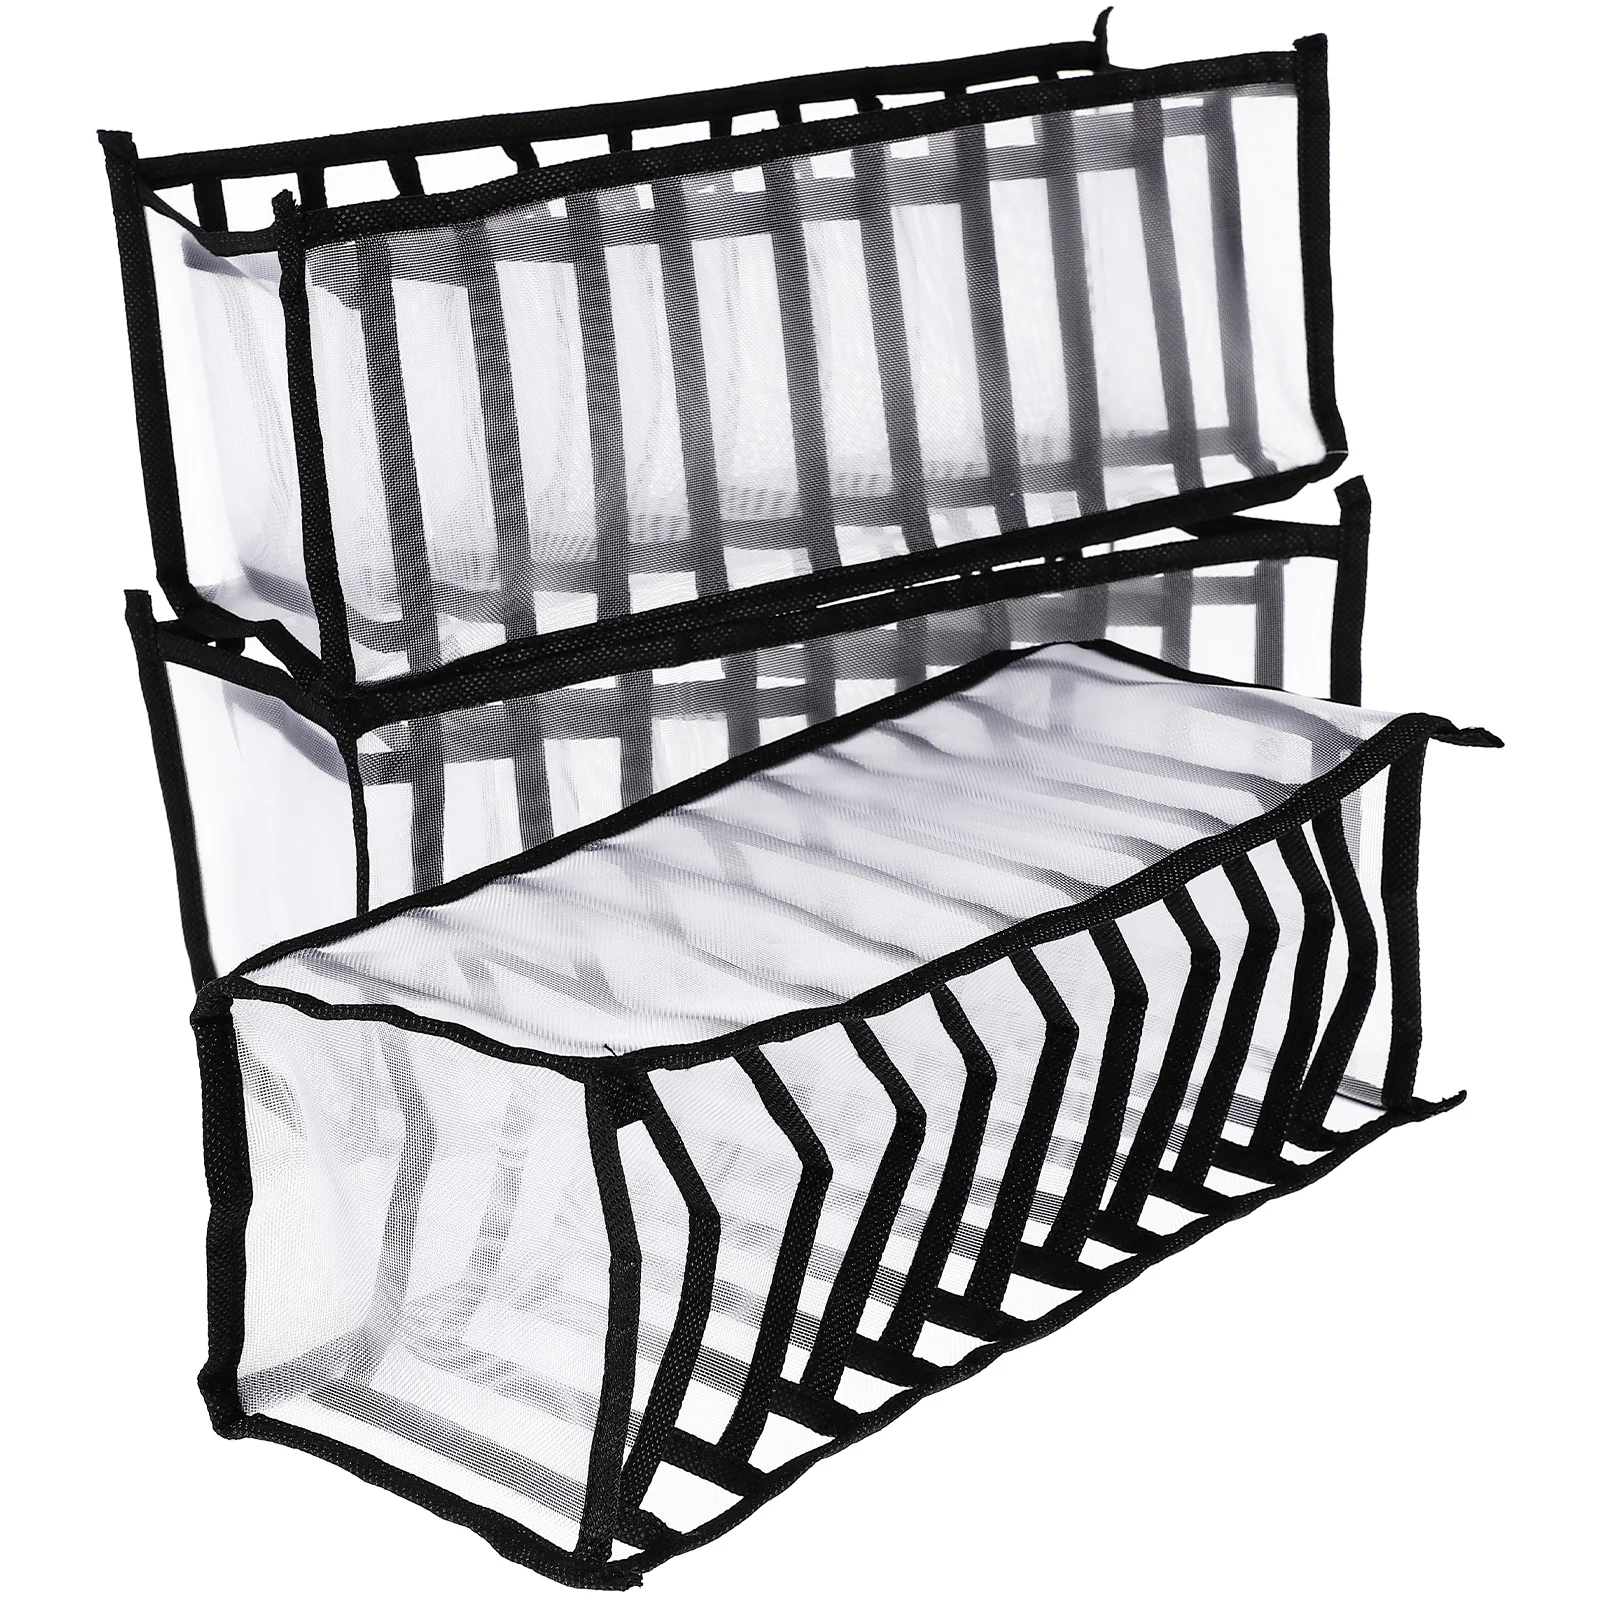 

Drawer Organizer Storage Box Closet Socks Holder Clothes Boxes Divider Containers Women Dividers Foldable Organizers